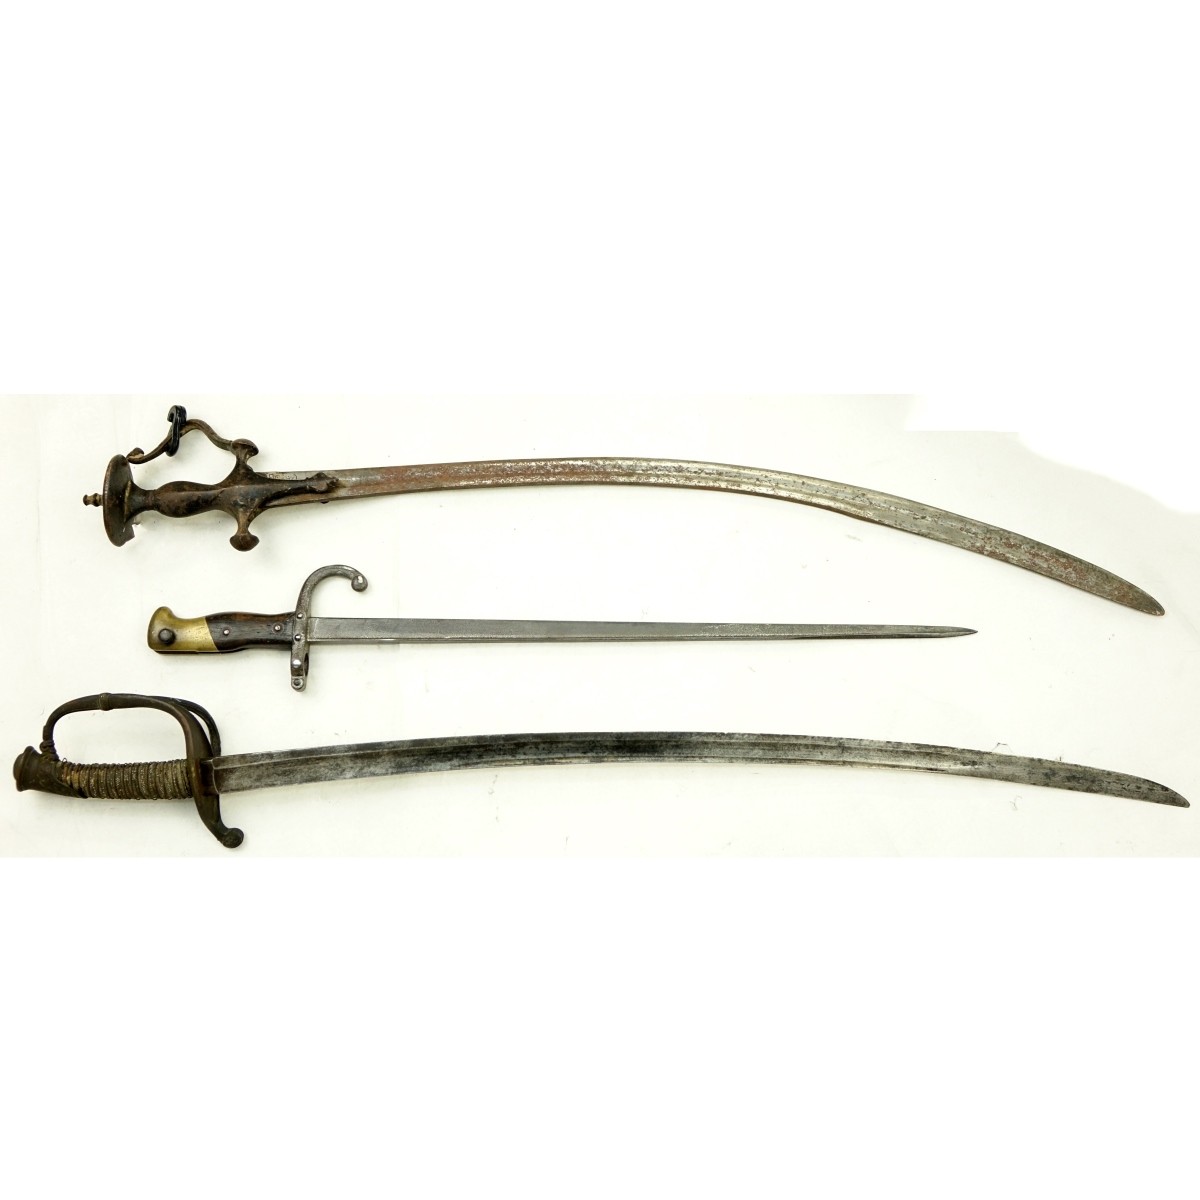 Grouping of Three (3) Antique Military Swords